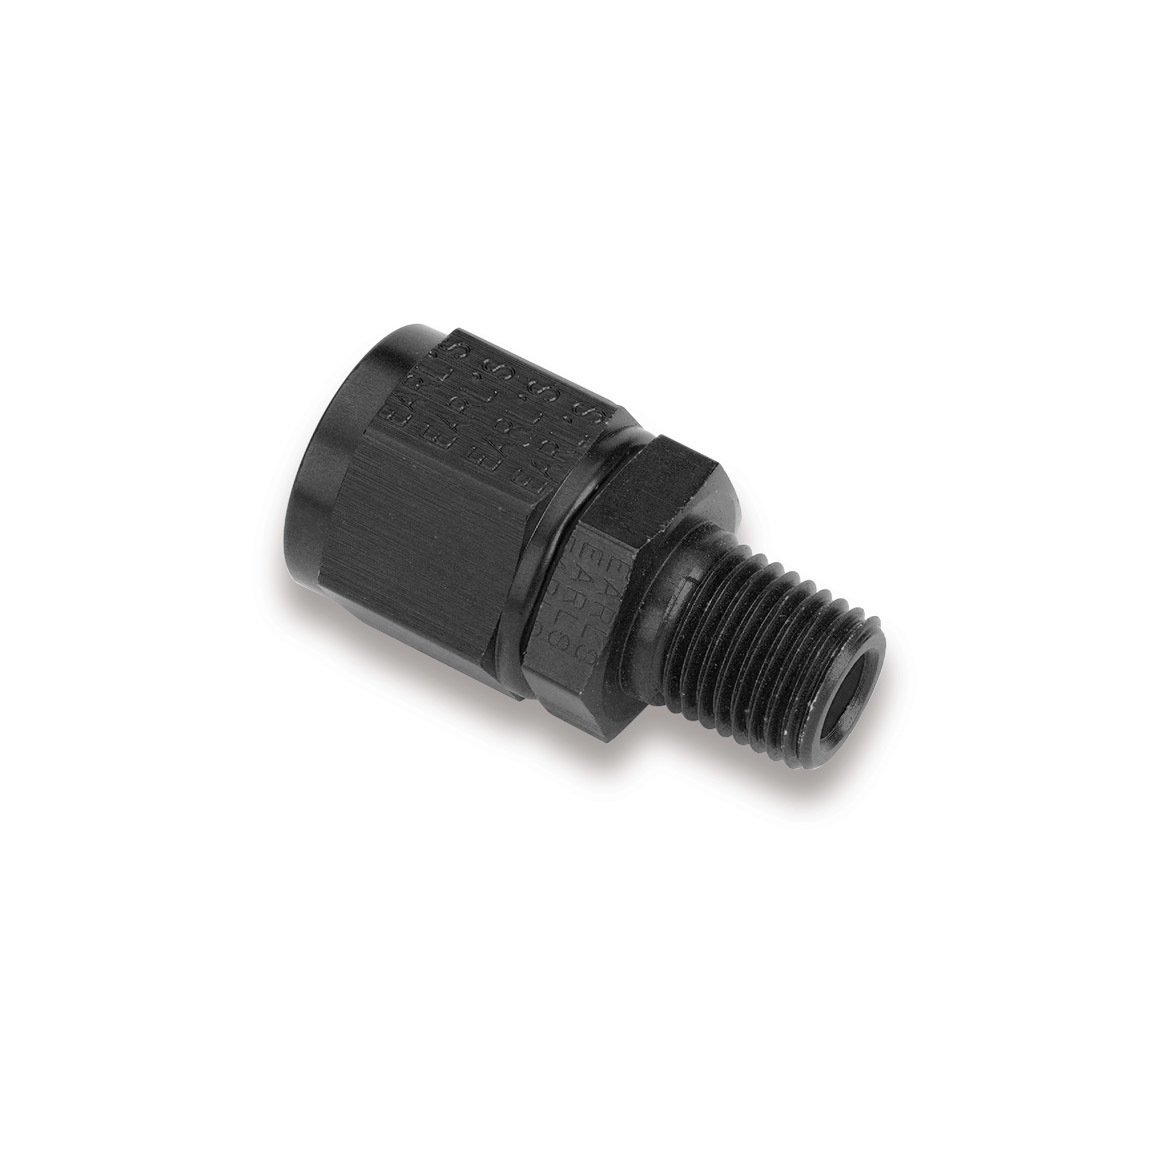 Earls AT916104ERL Fitting, Adapter, Straight, 4 AN Female Swivel to 1/8 in NPT Male, Aluminum, Black Anodized, Each